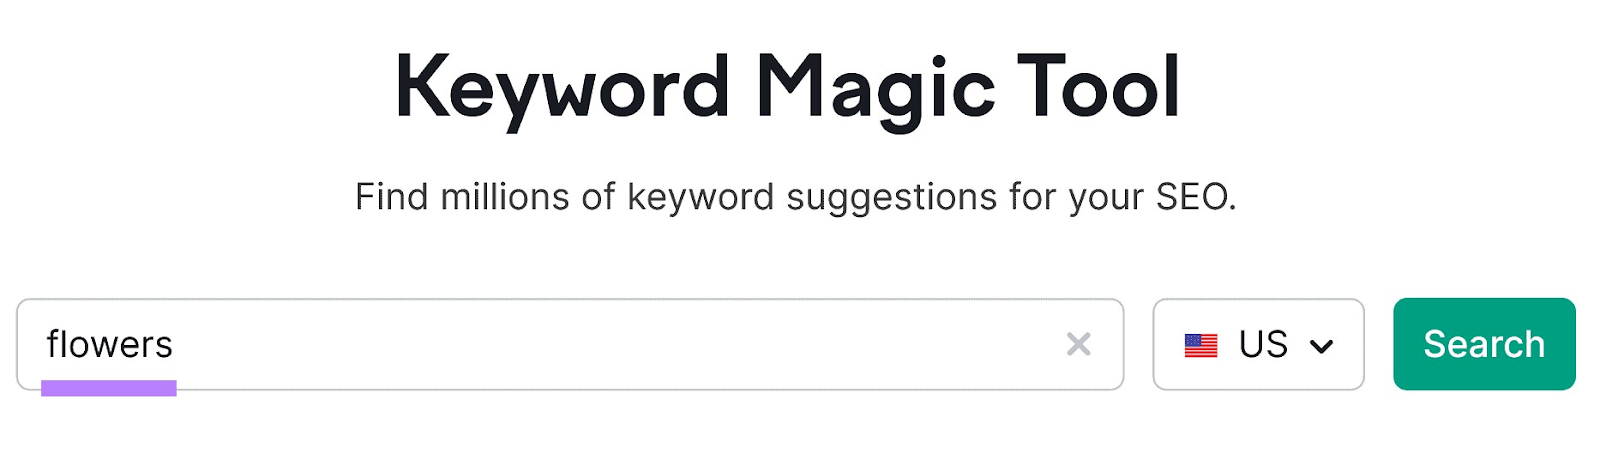 "flowers" entered into Keyword Magic Tool search bar